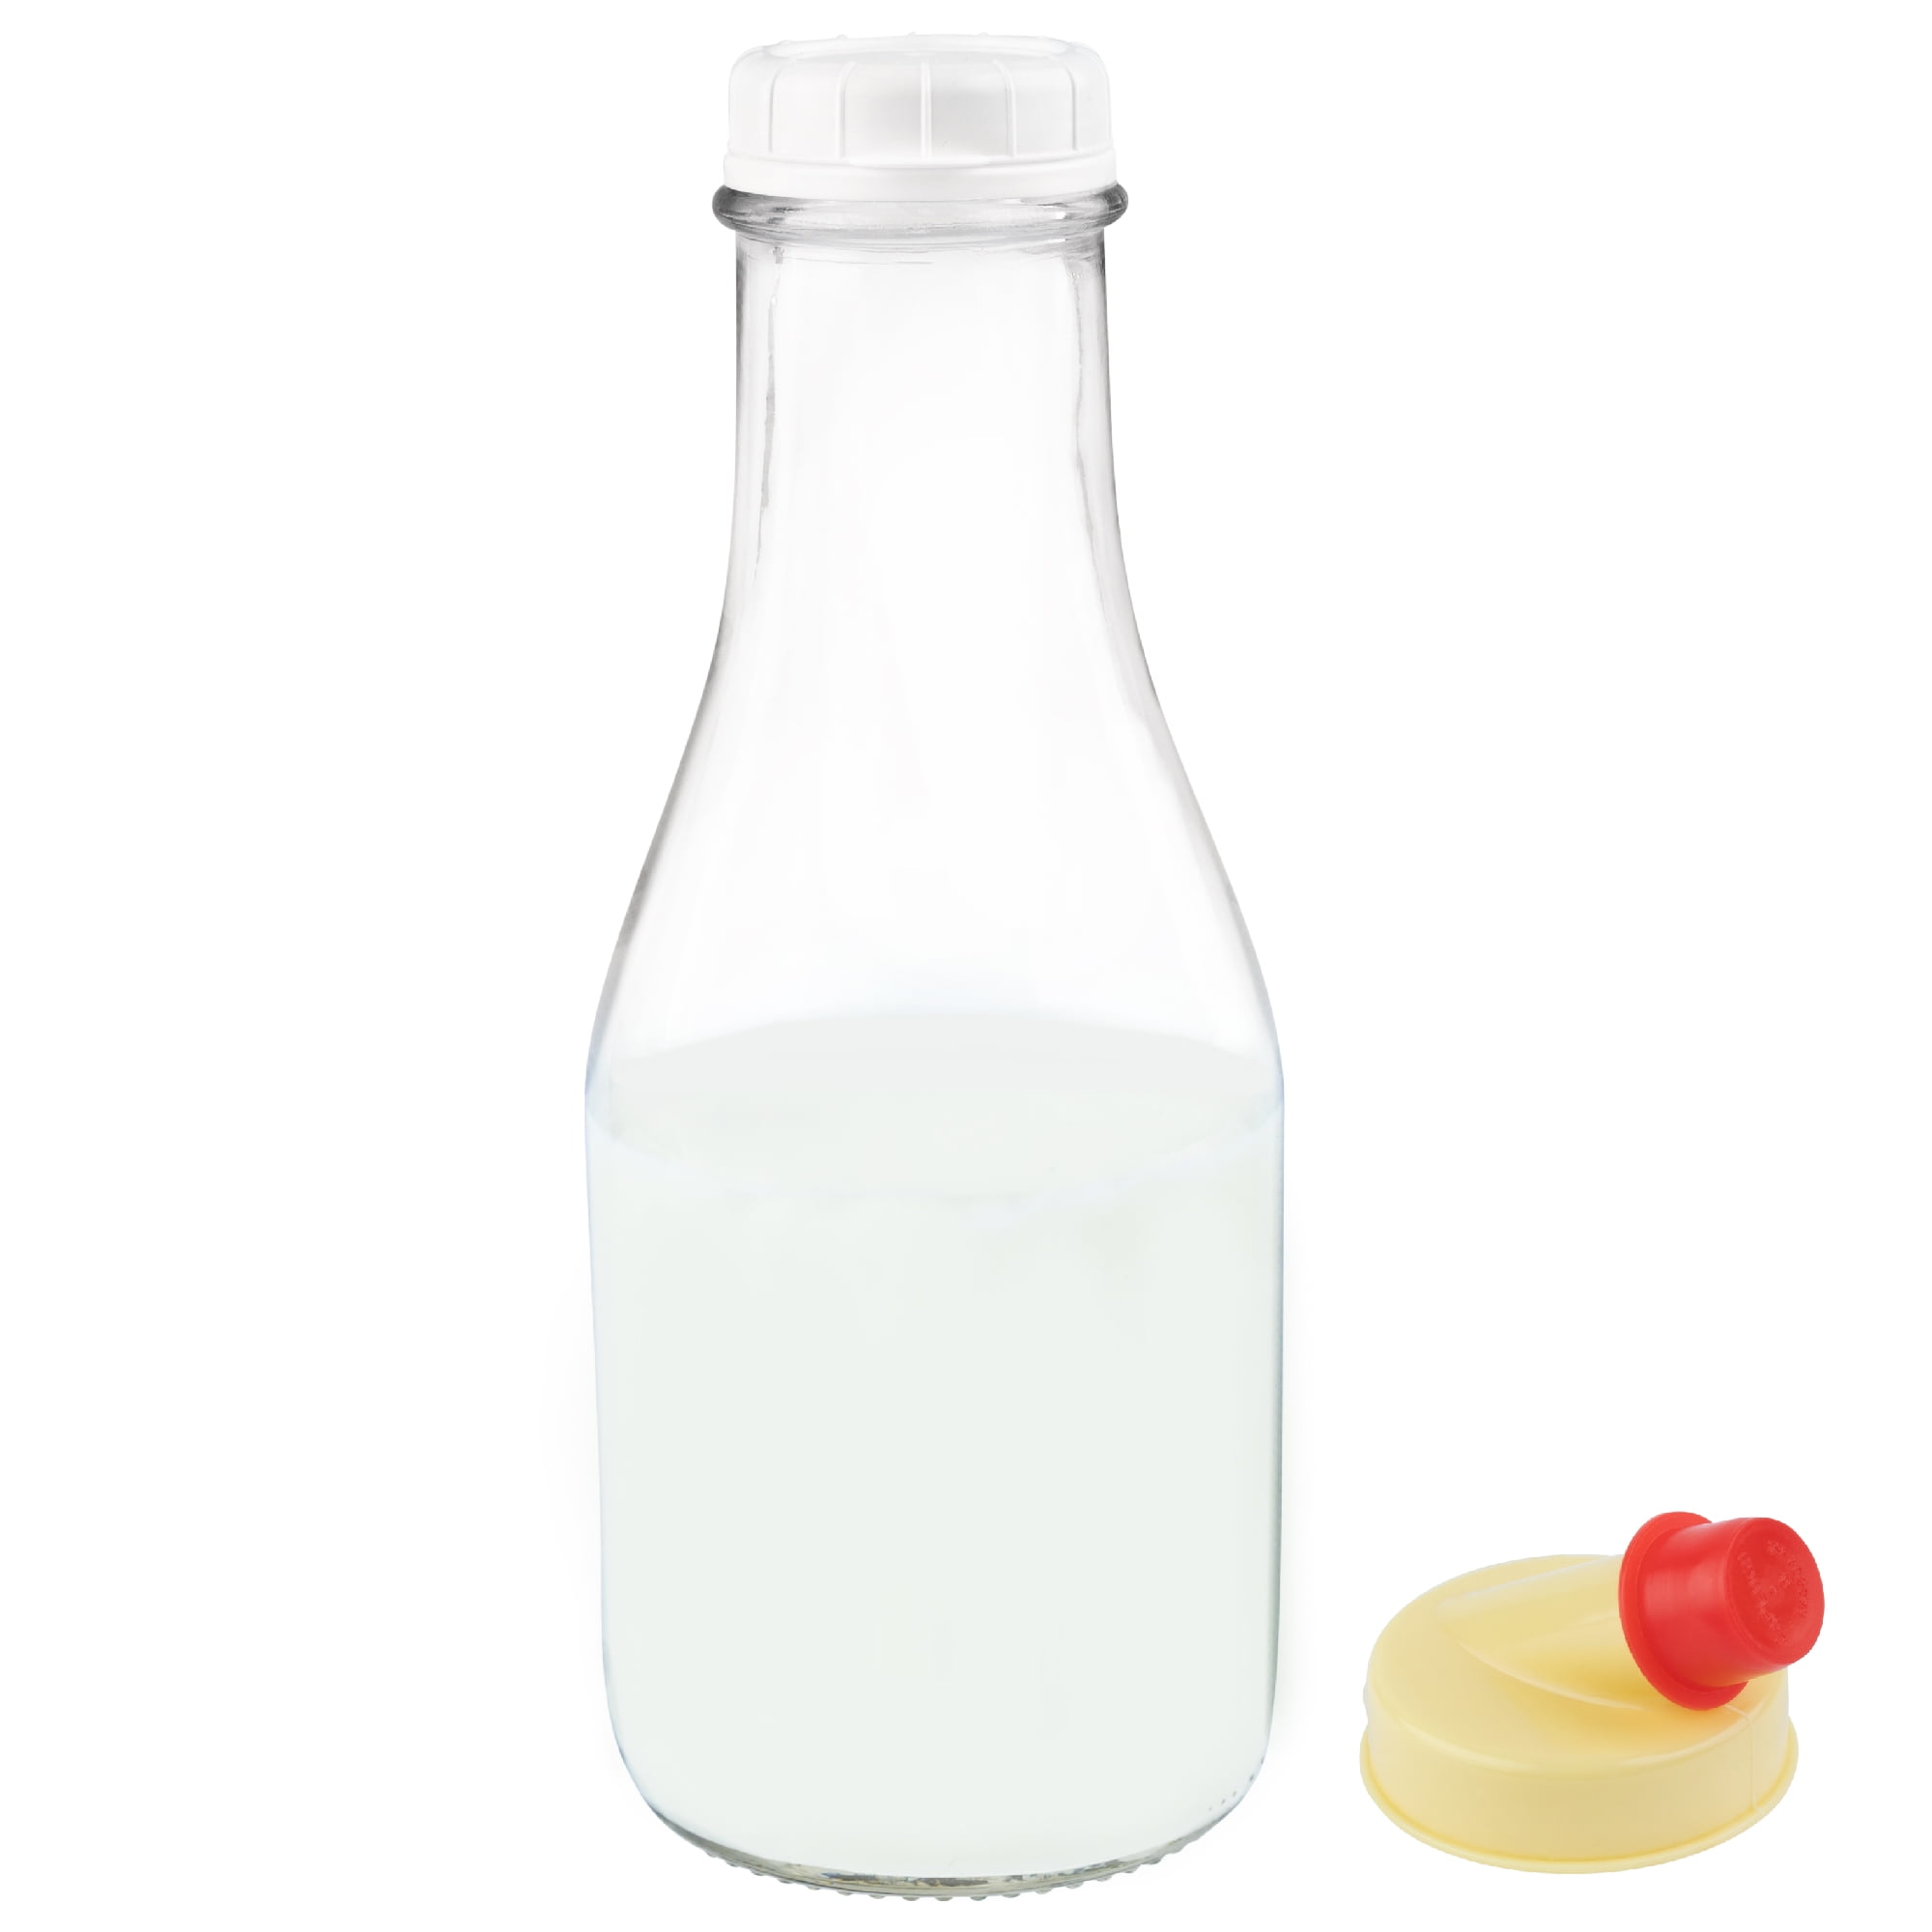 kitchentoolz 1 Gallon Glass Jar with Lid Wide Mouth Large 1 Gallon, White